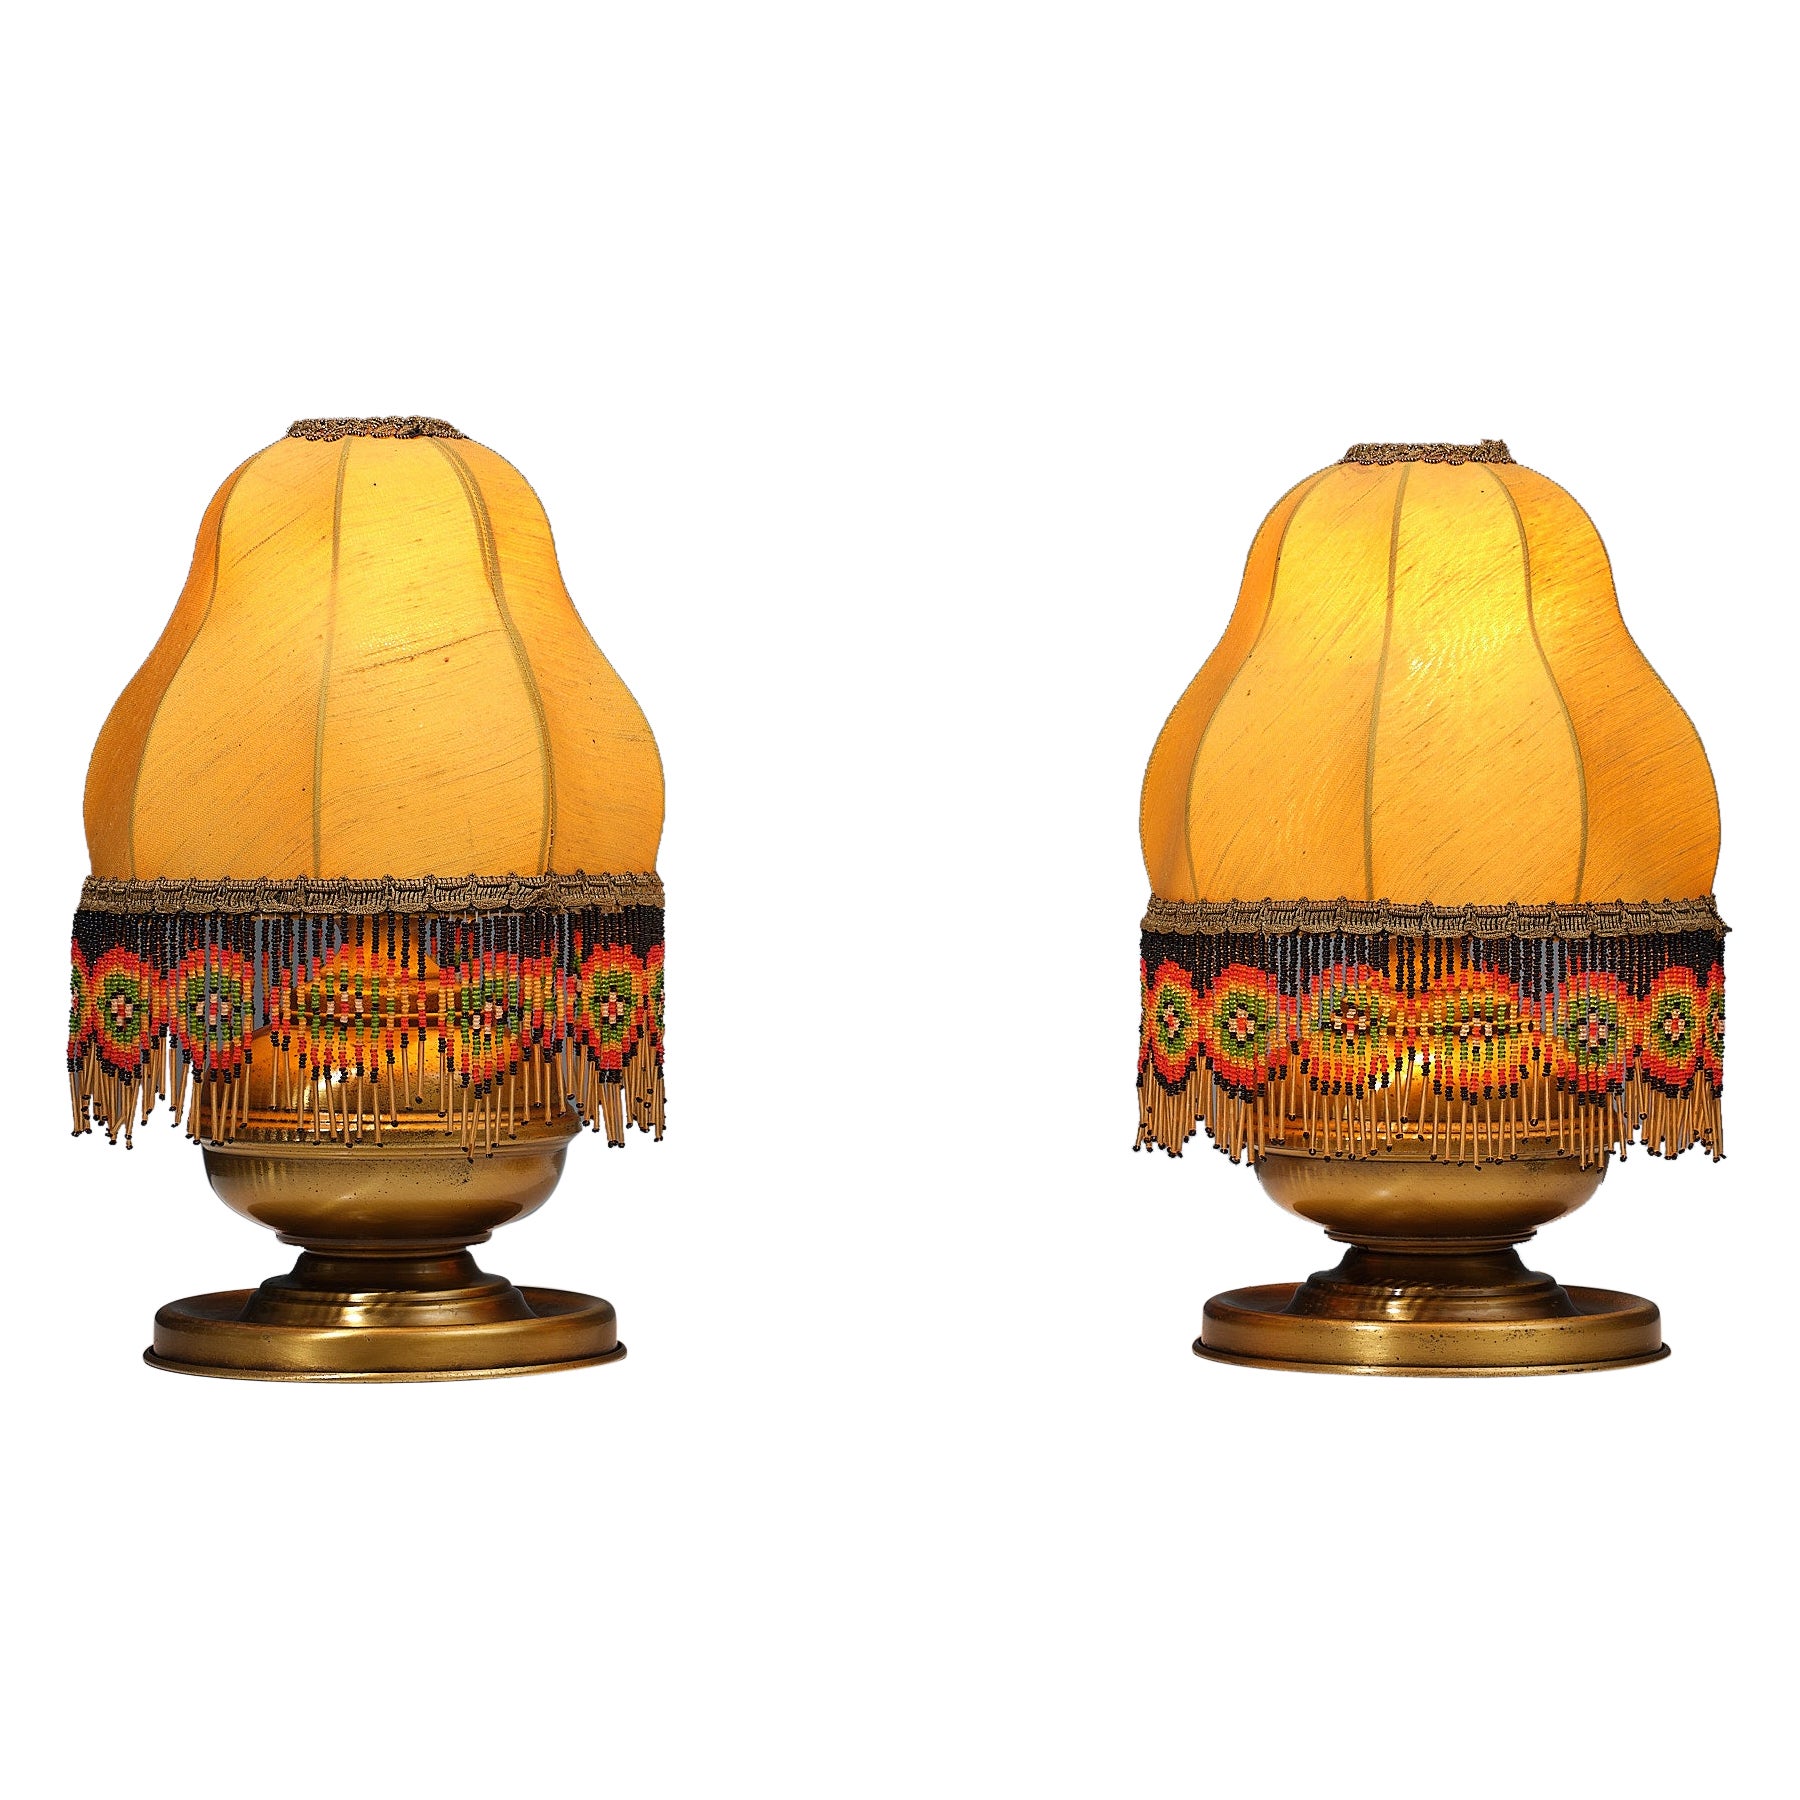 Pair of 1960s Italian Brass Table Lamps - Classic Elegance with Original Patina 